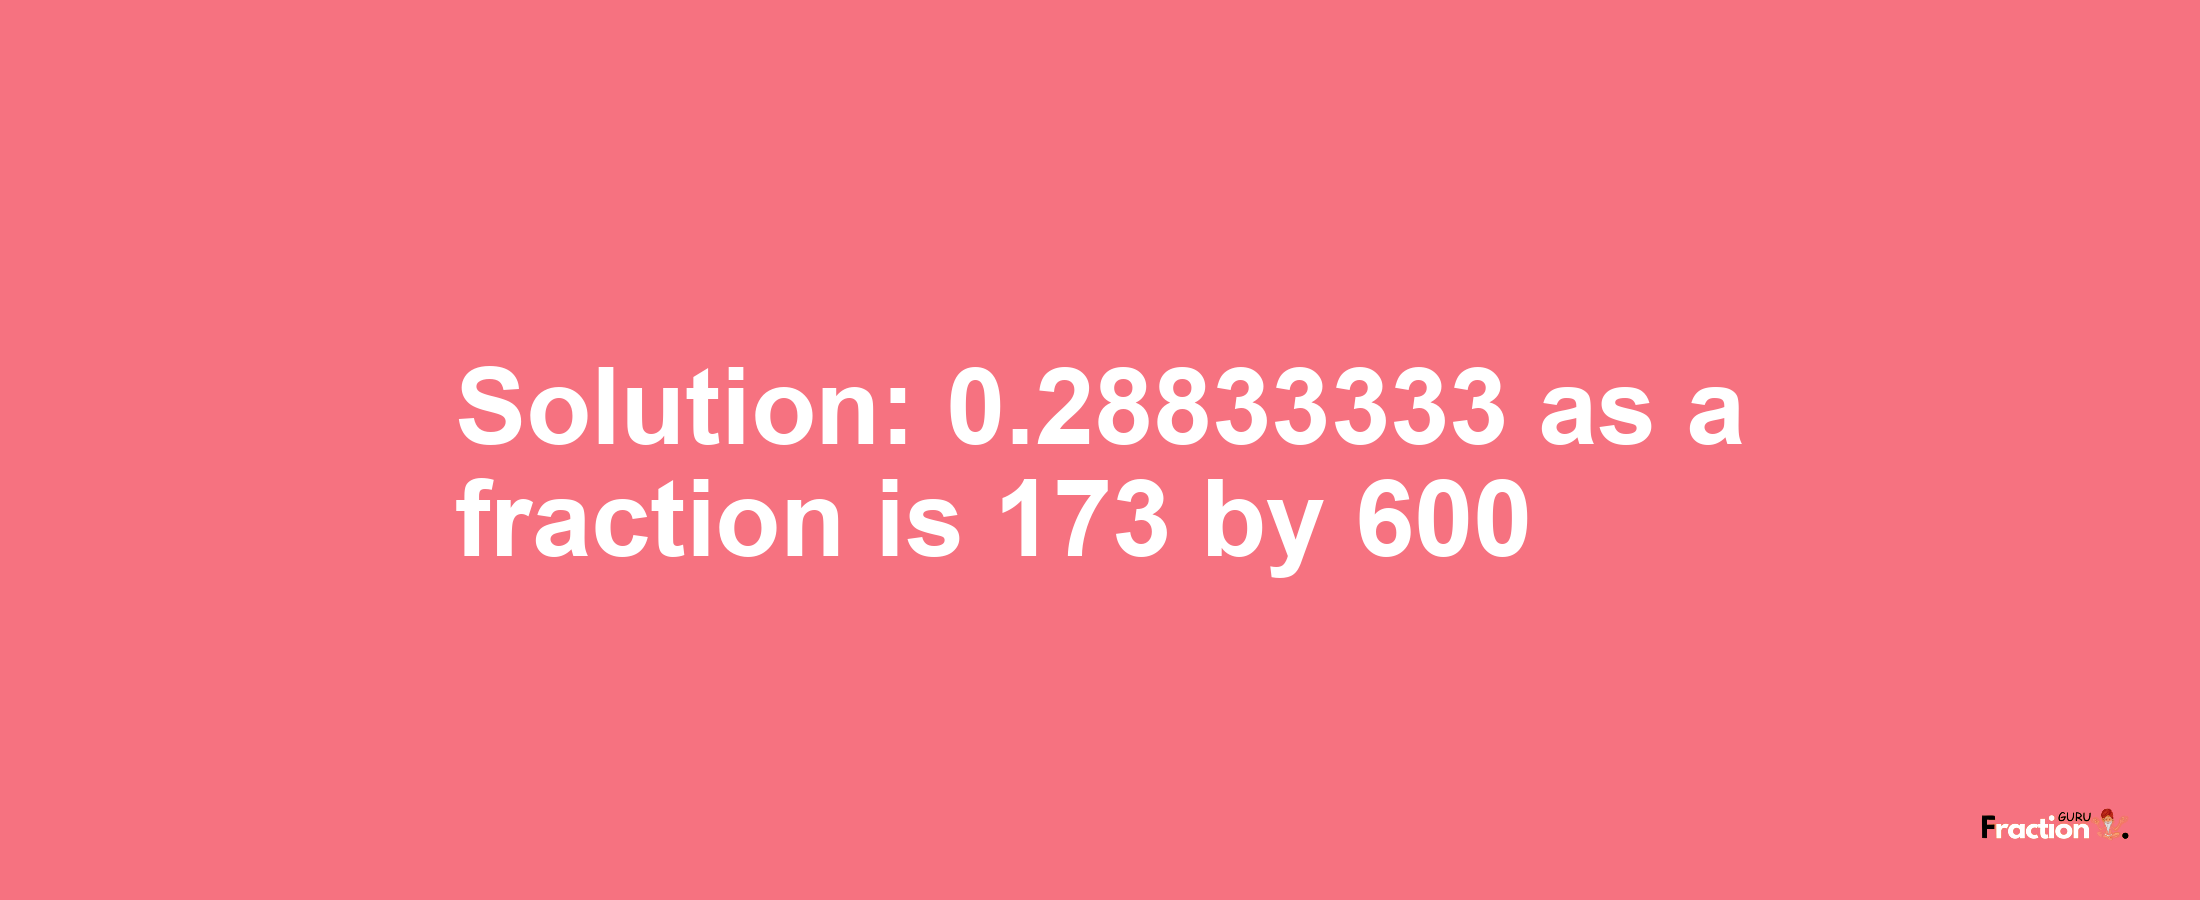 Solution:0.28833333 as a fraction is 173/600